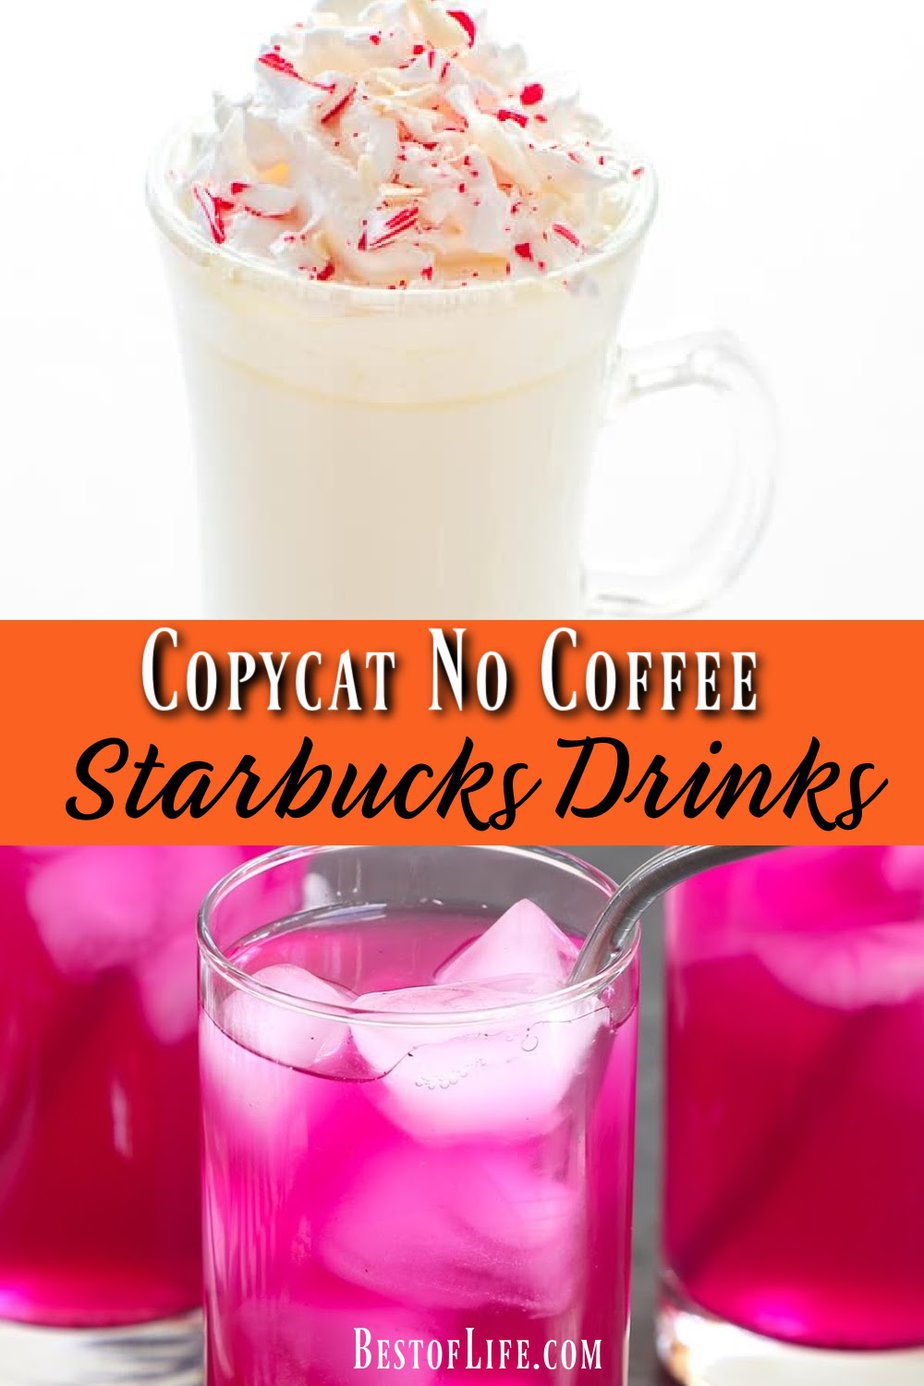 Making Starbucks no coffee copycat drink recipes are easier than you may think and can save you a lot of time since there is no line at home. Starbucks Drink Recipes | Starbucks Recipes at Home | Copycat Starbucks Recipes | Starbucks Drinks Without Coffee | No Coffee Starbucks Drinks | Fruity Starbucks Drinks #starbucks #recipes